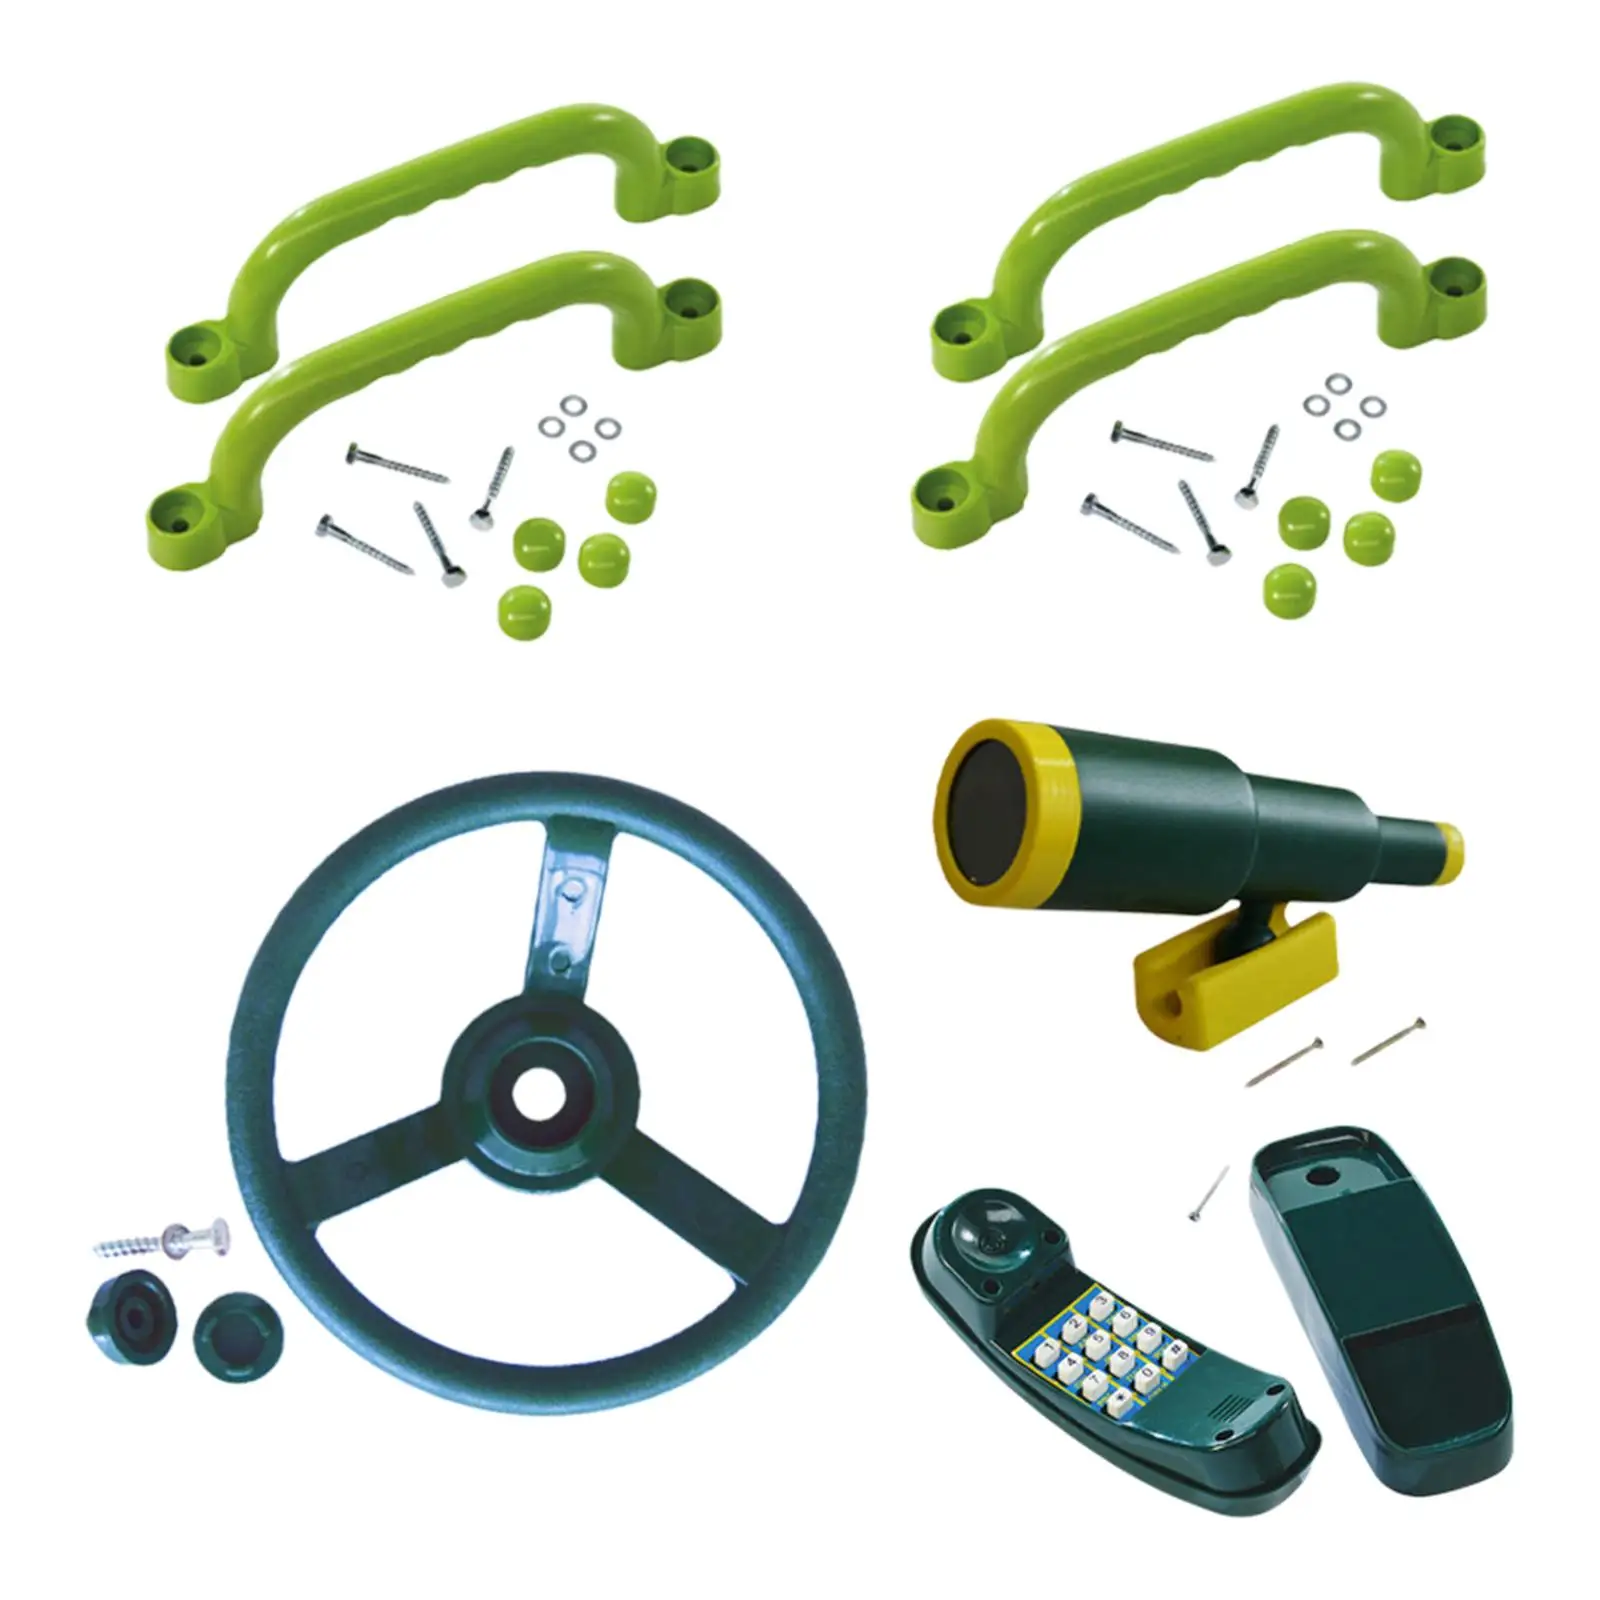 Playground Toy Set with Screw Playground Accessories for Climbing Frame